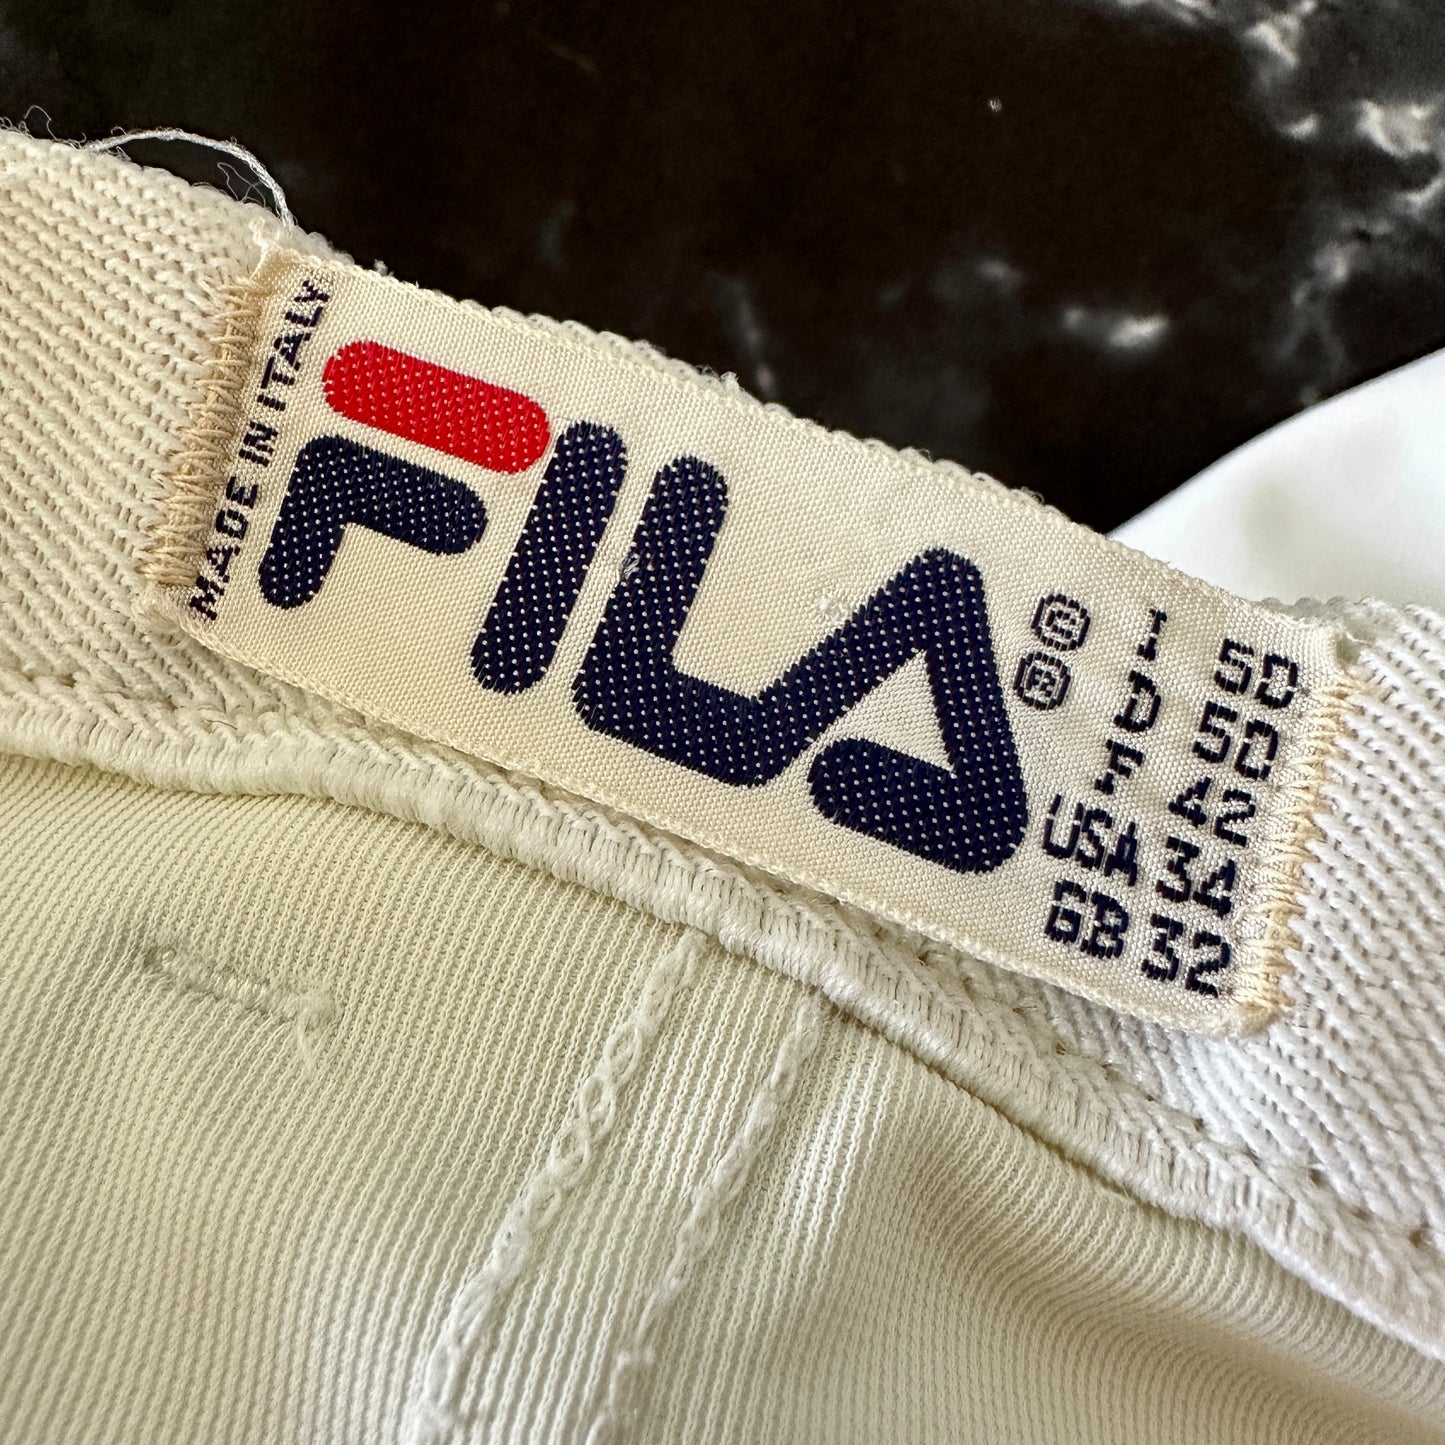 Fila Vintage 80s Tennis Shorts - White - 50 / L - Made in Italy